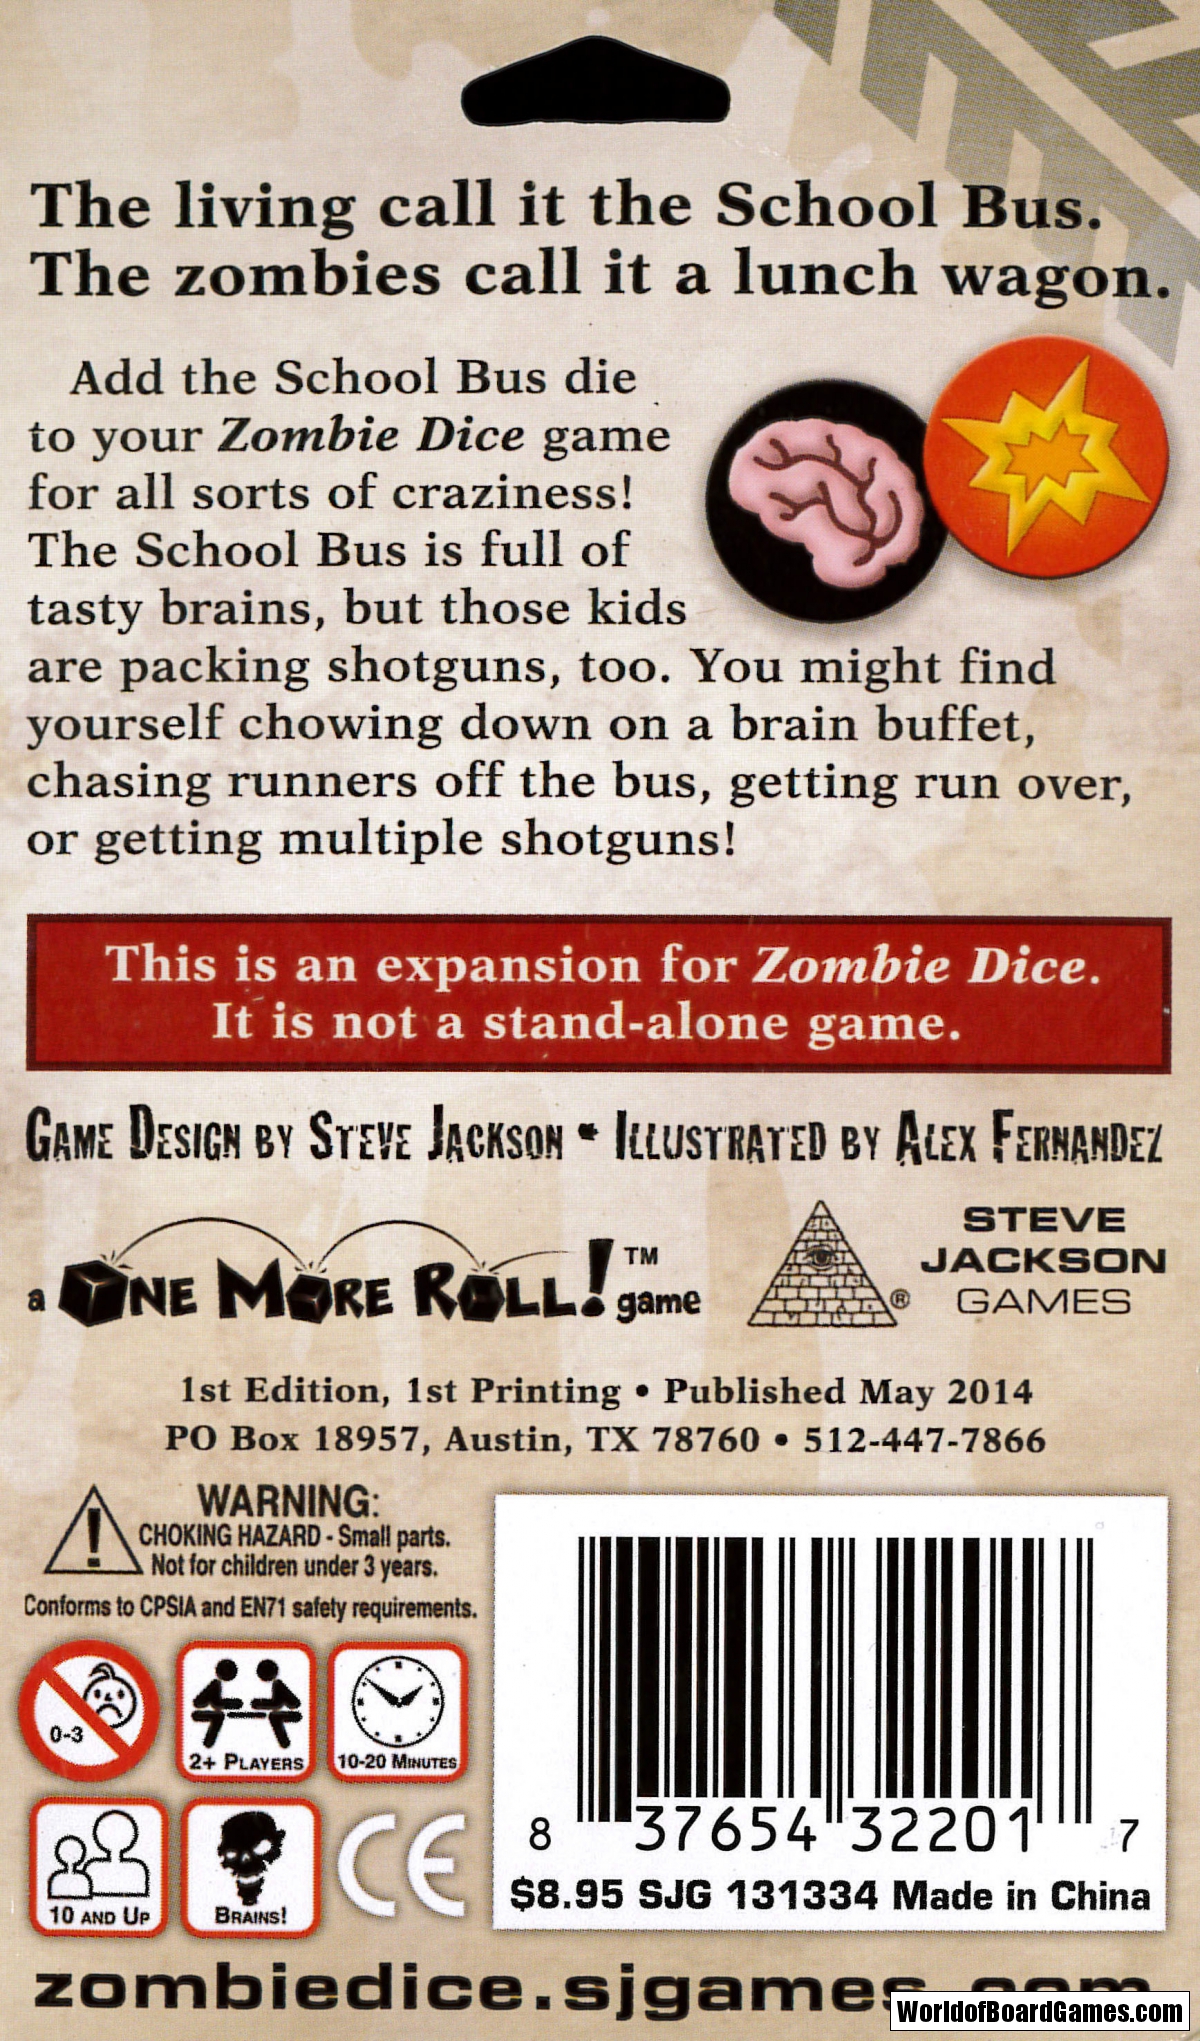 Zombie Dice 3 School Bus Game Expansion From Steve Jackson Games SJG 131334 